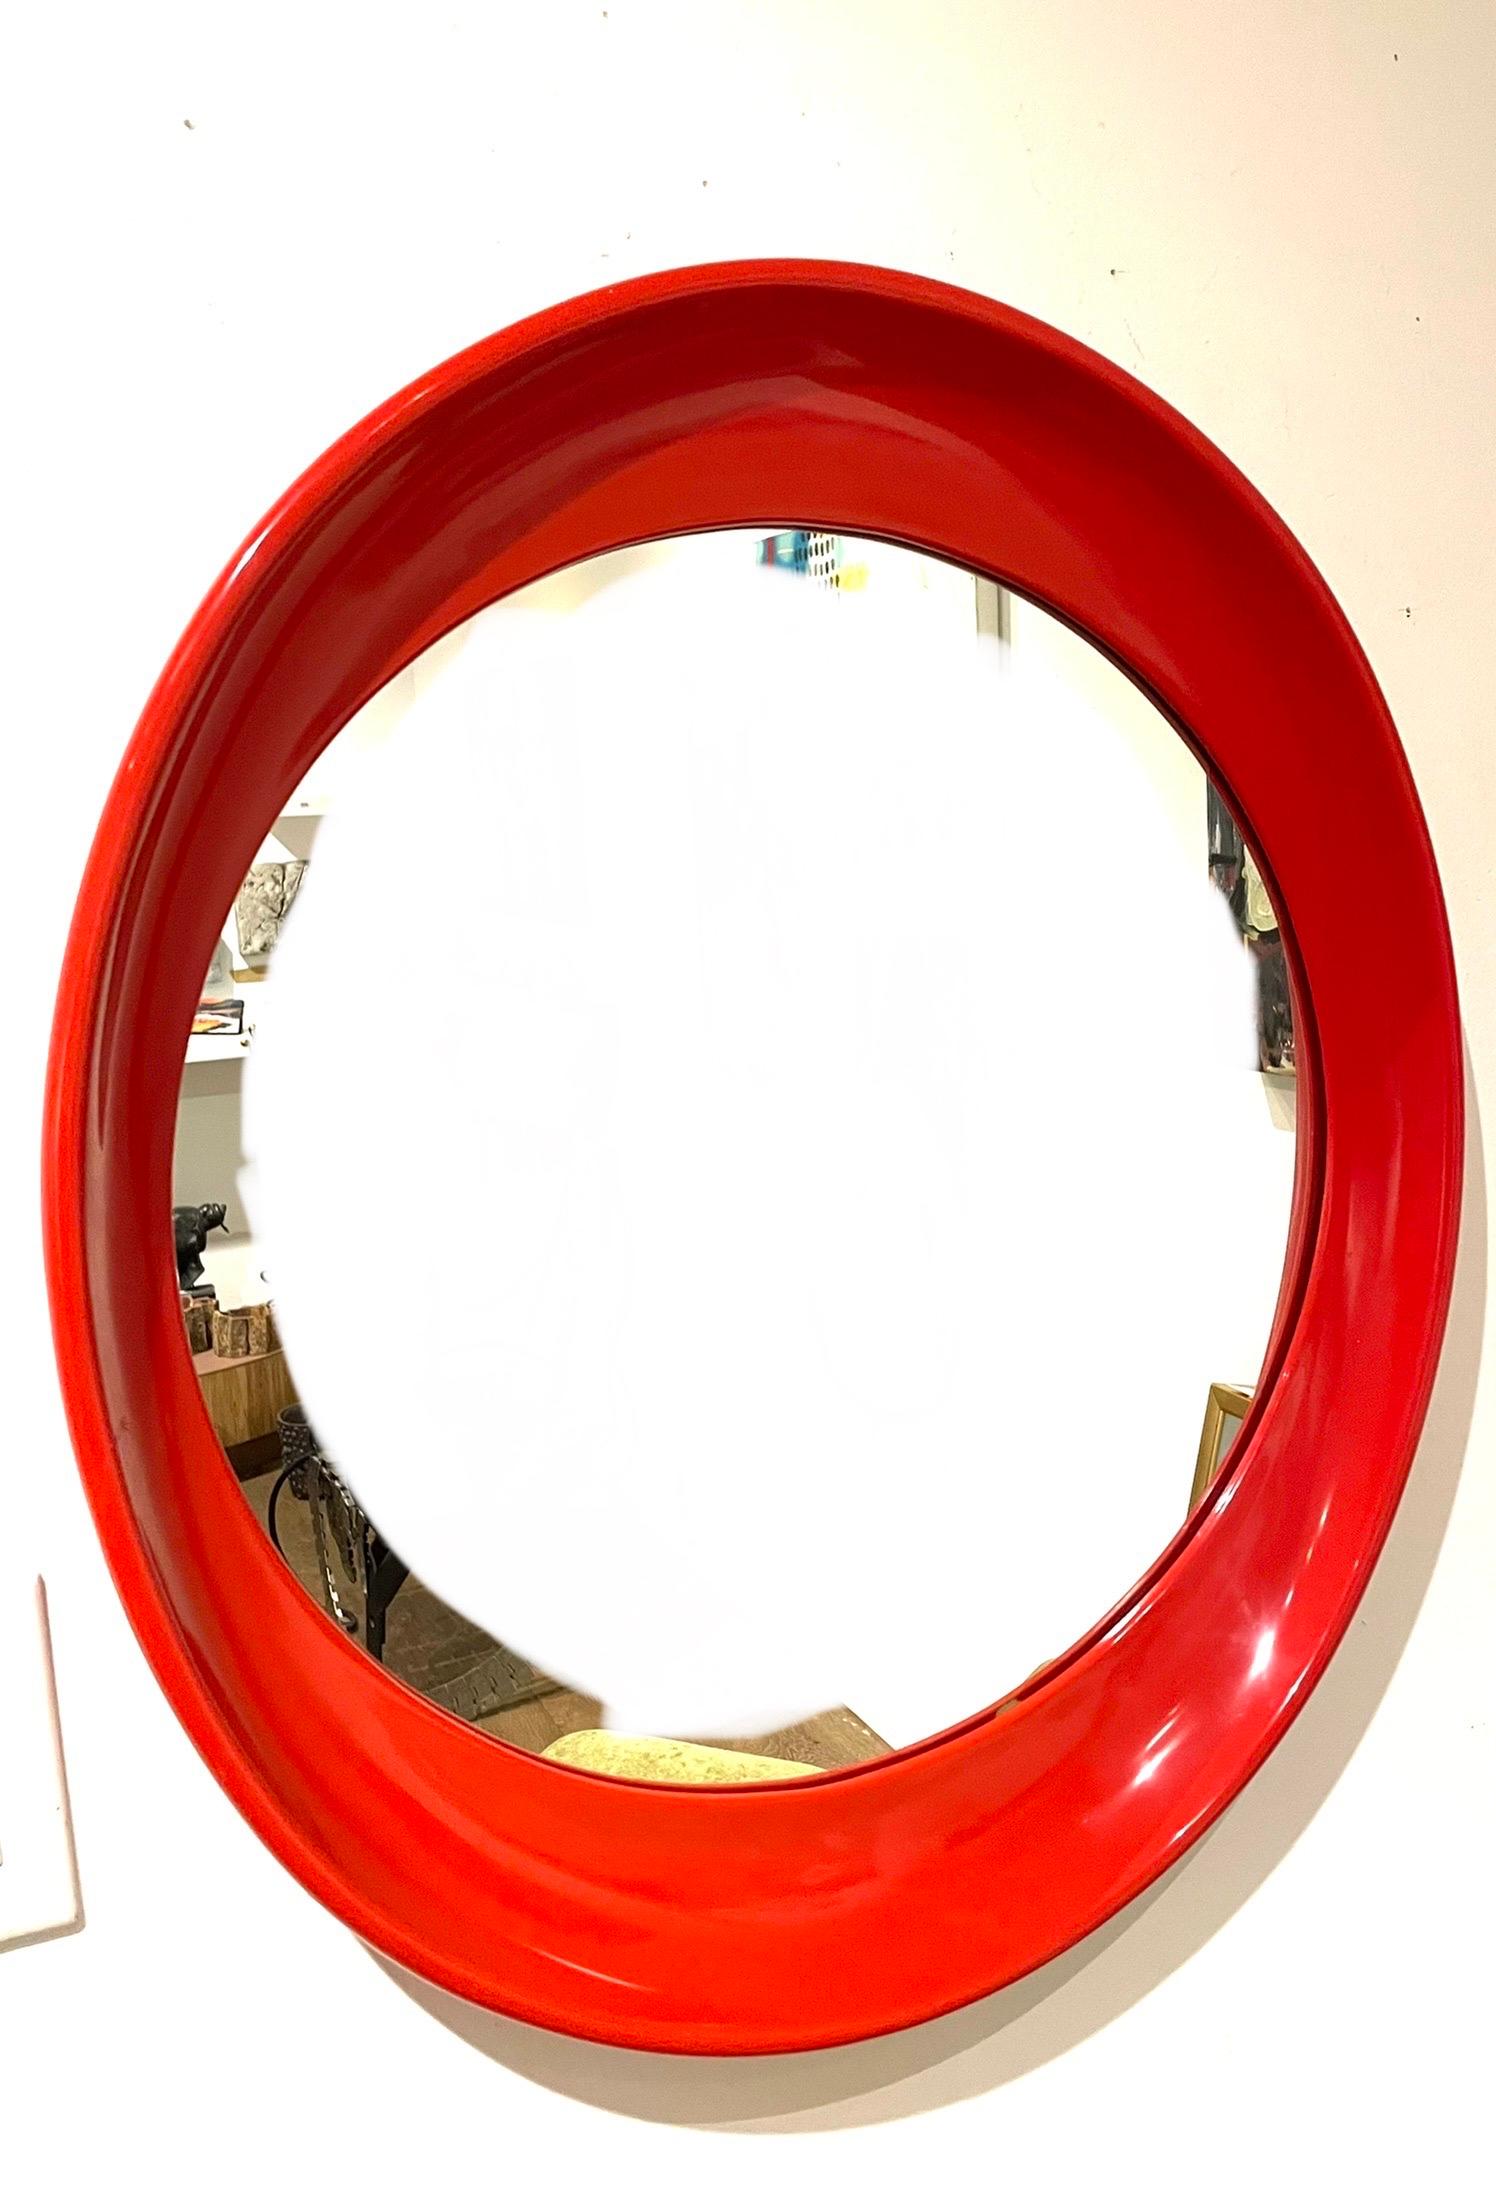 Nice red plastic frame mirror oval shape excellent condition, circa 1980's beautiful and unique.